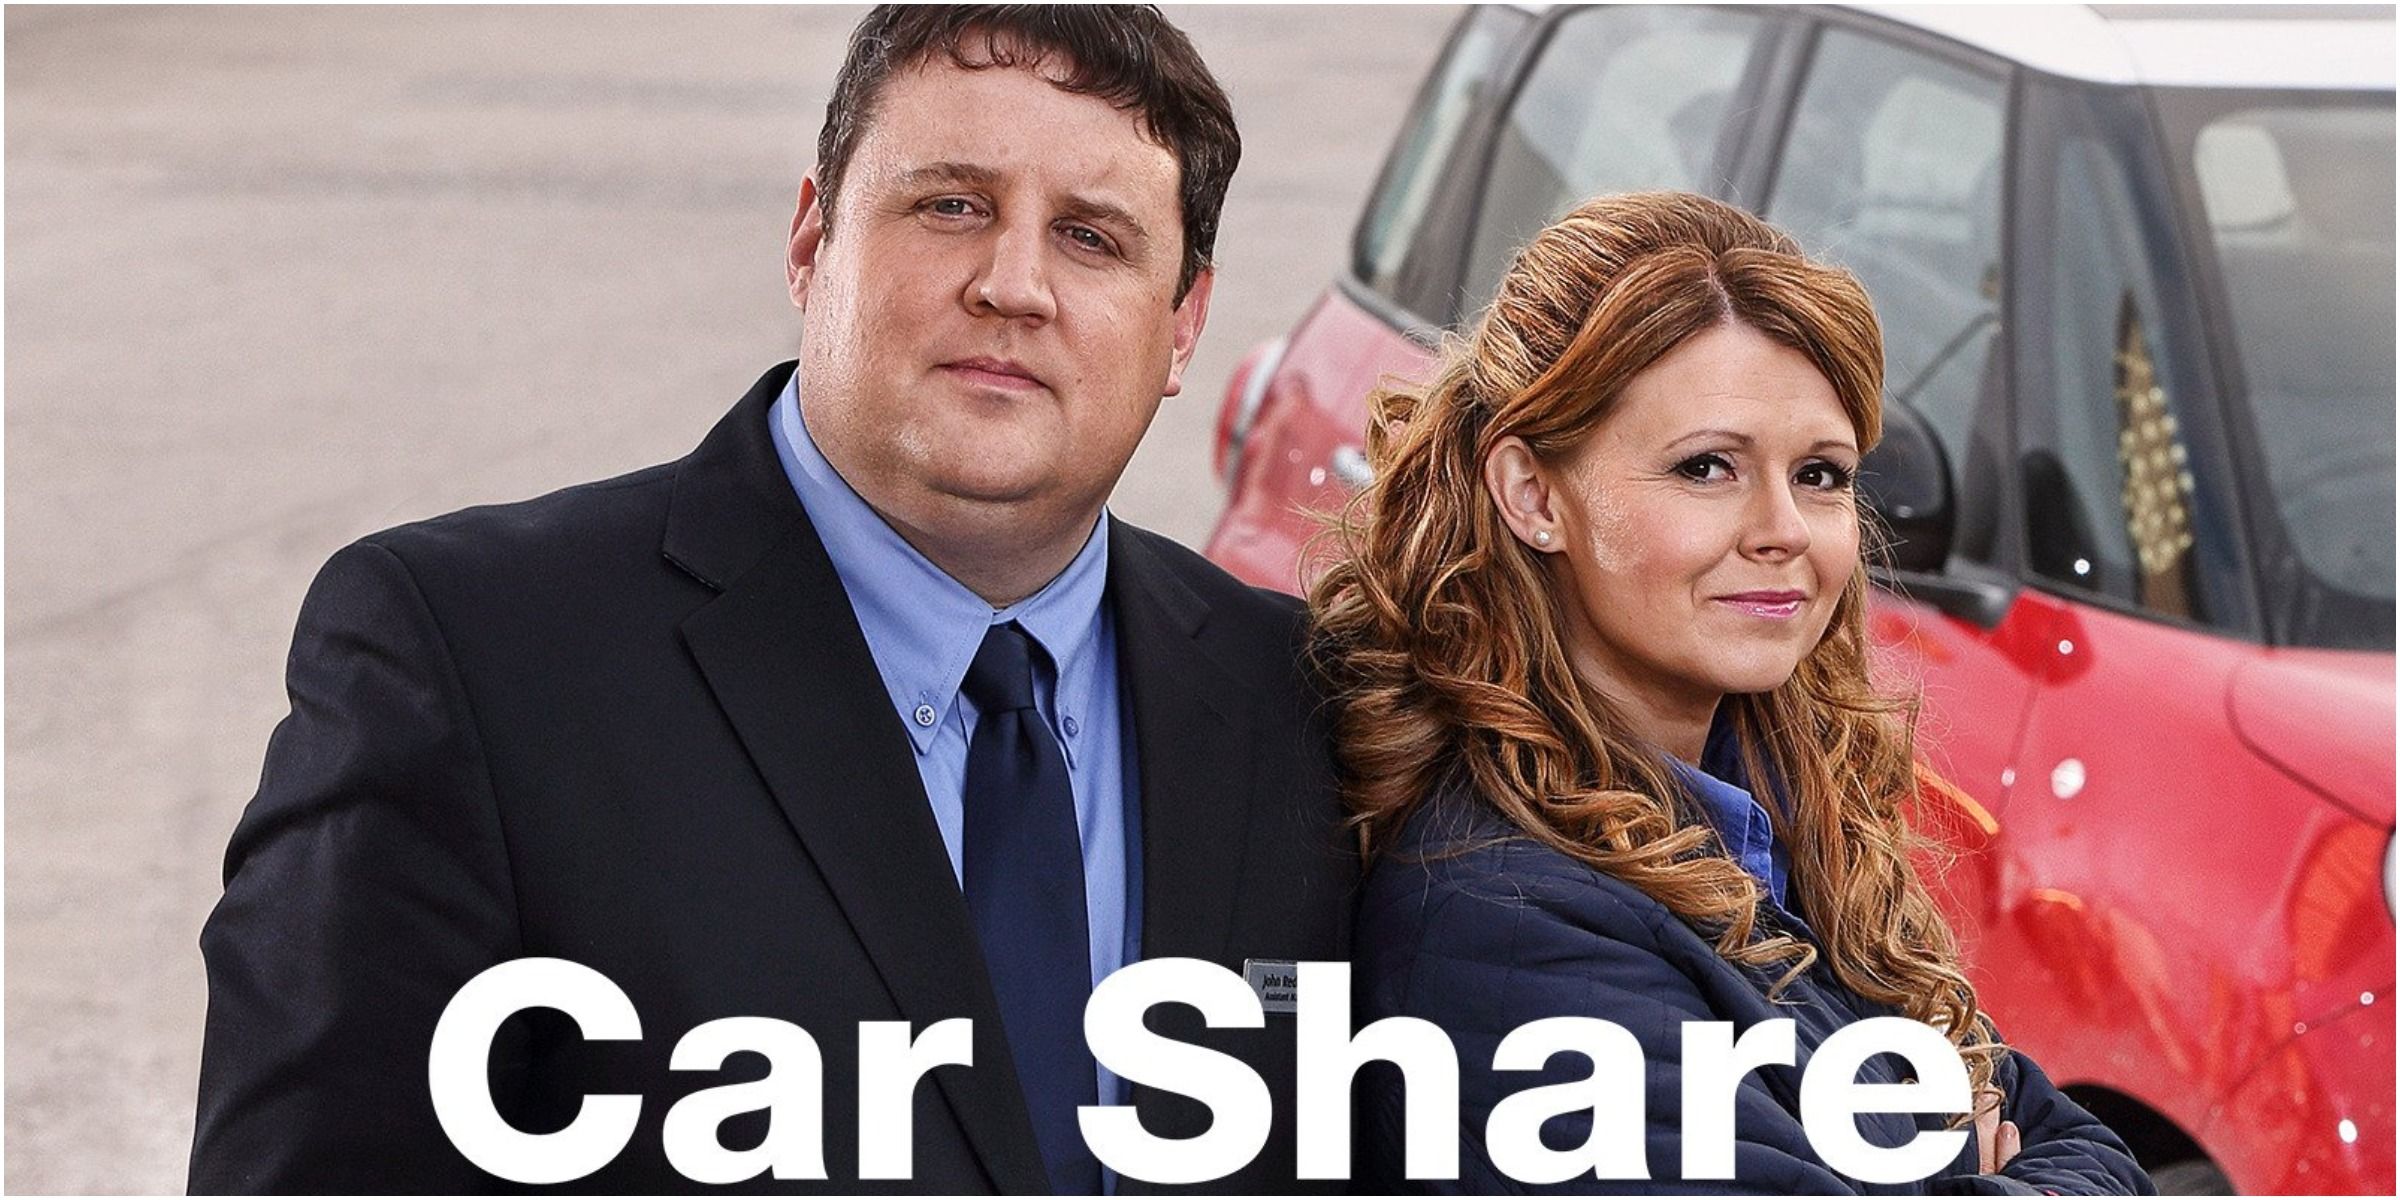 10 Best British Sitcoms Of The Past Decade